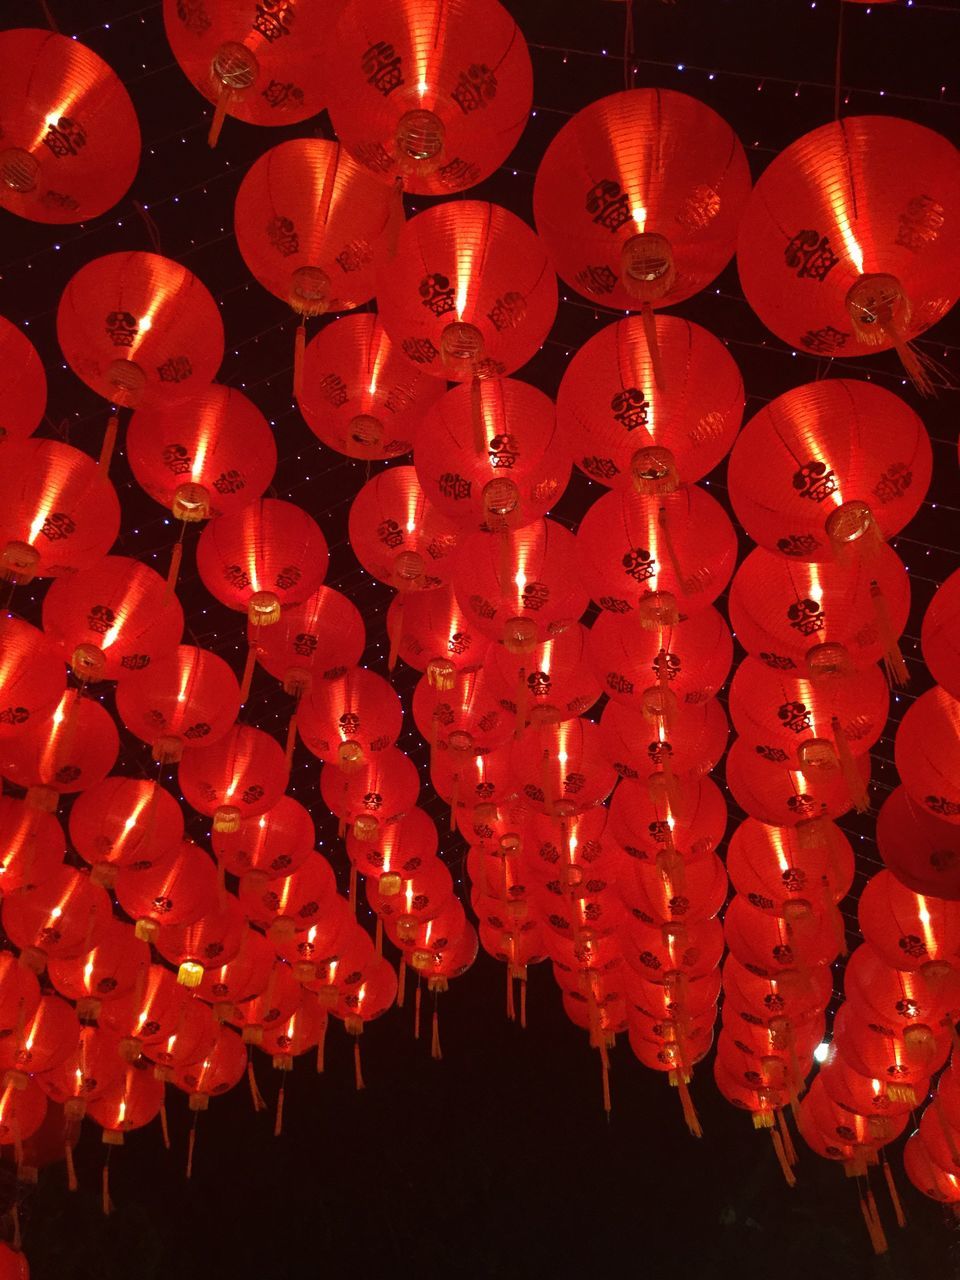 hanging, chinese new year, chinese lantern festival, chinese lantern, red, lantern, low angle view, large group of objects, lighting equipment, cultures, sky, no people, paper lantern, outdoors, night, close-up